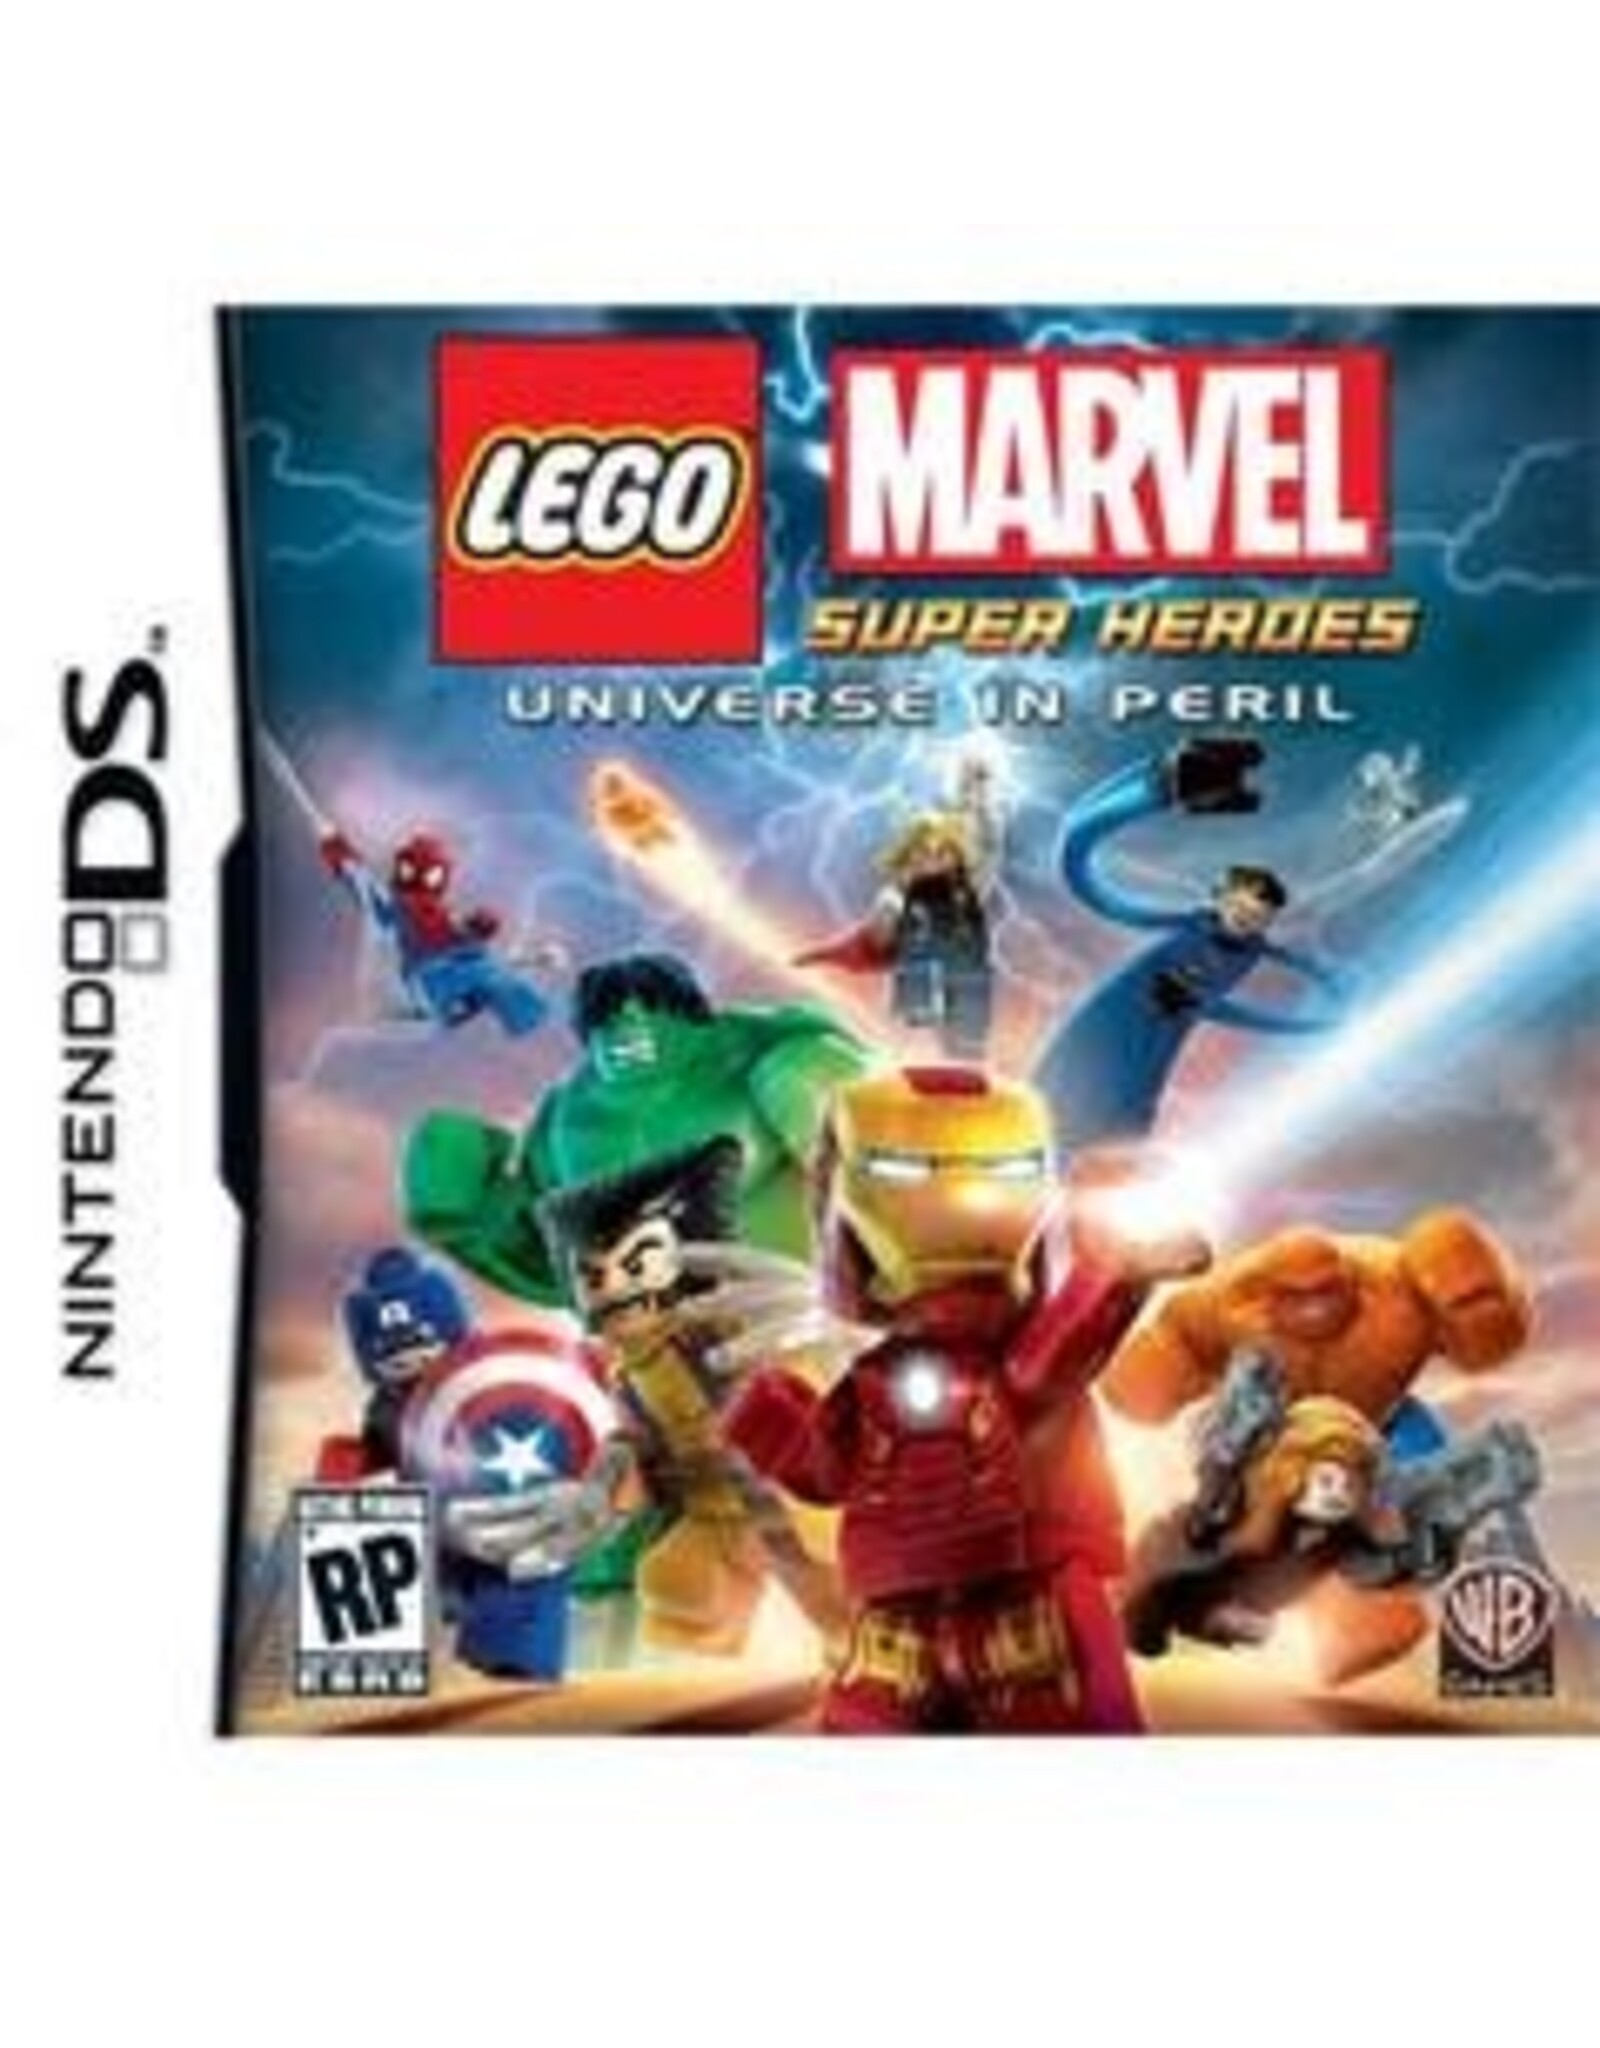 Nintendo DS LEGO Marvel Super Heroes: Universe in Peril (Used)